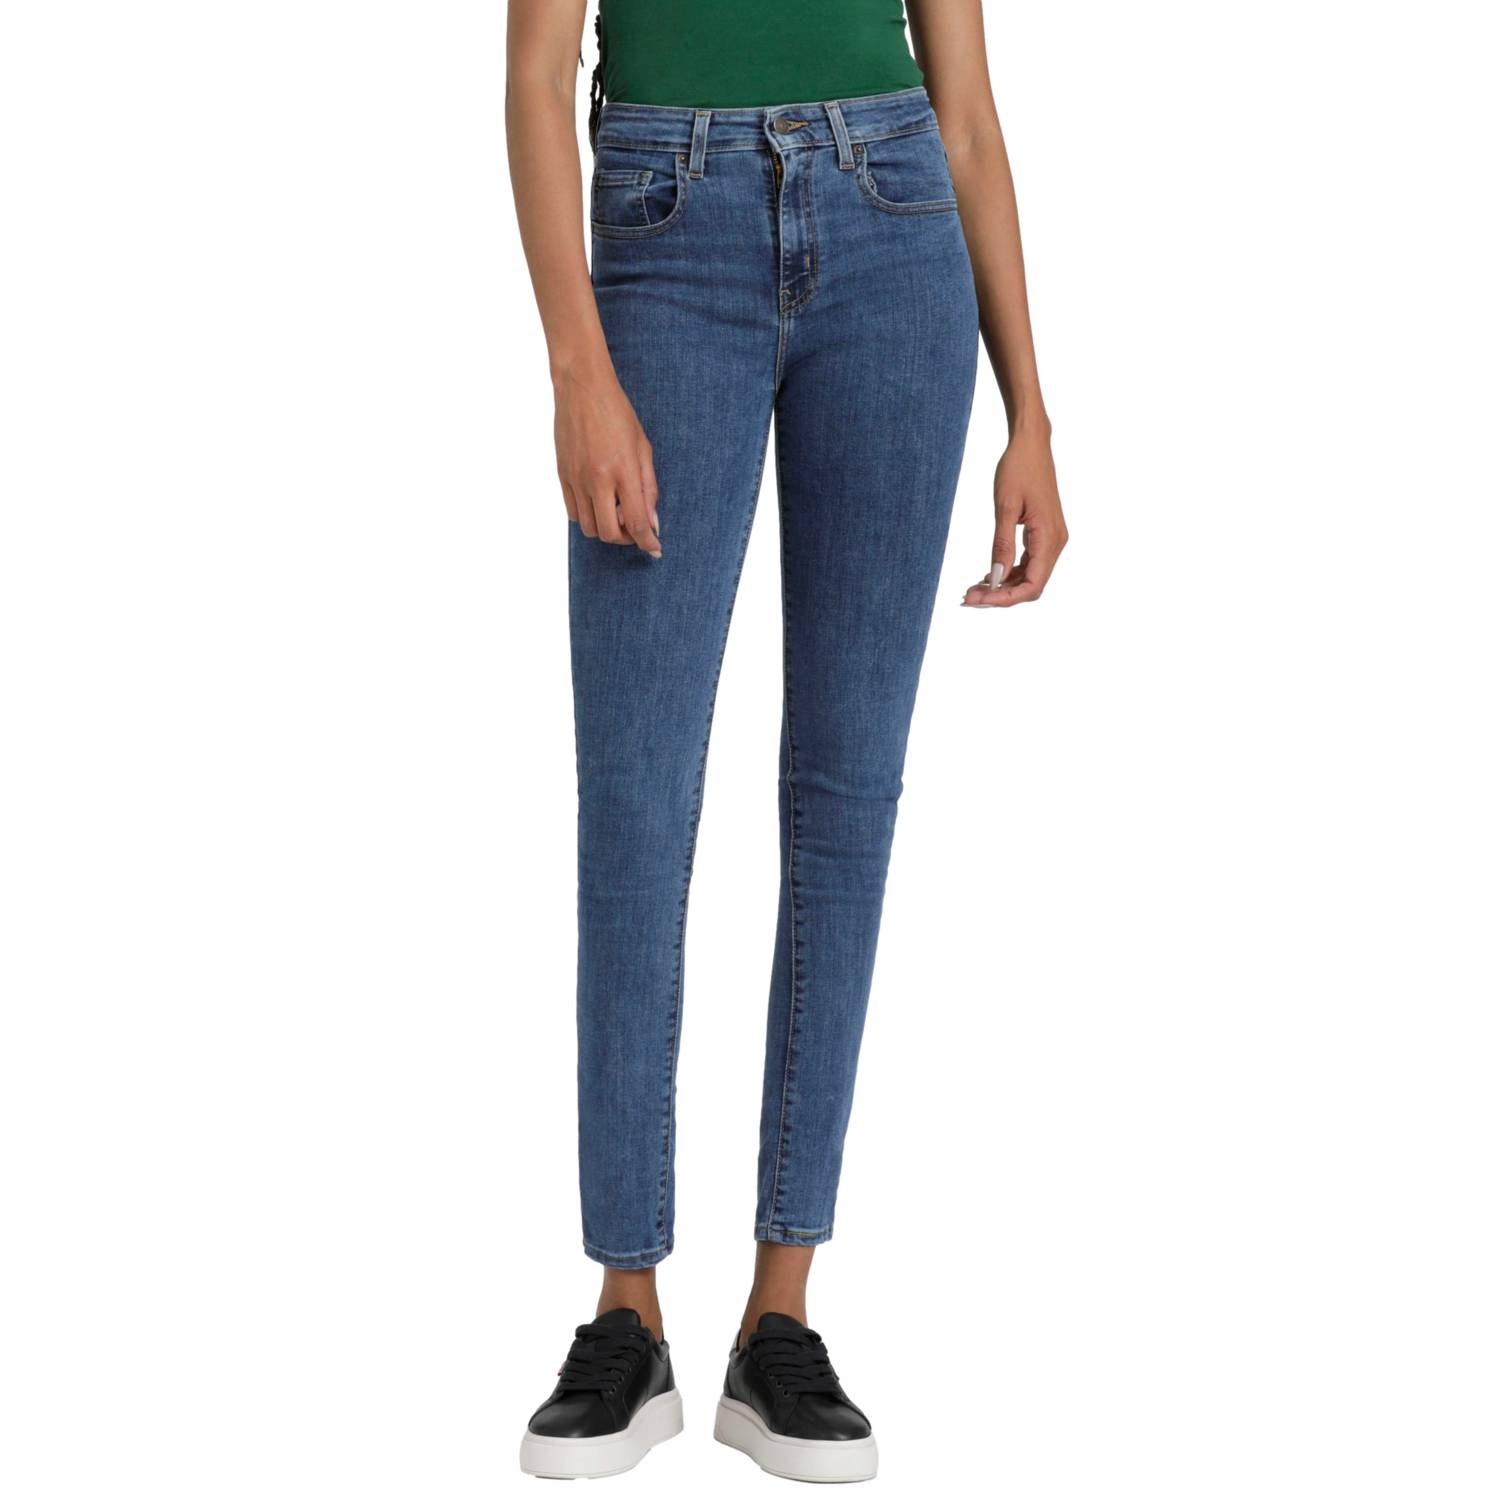 LEVIS Jeans Mujer 721 High Rise Skinny Azul Levis